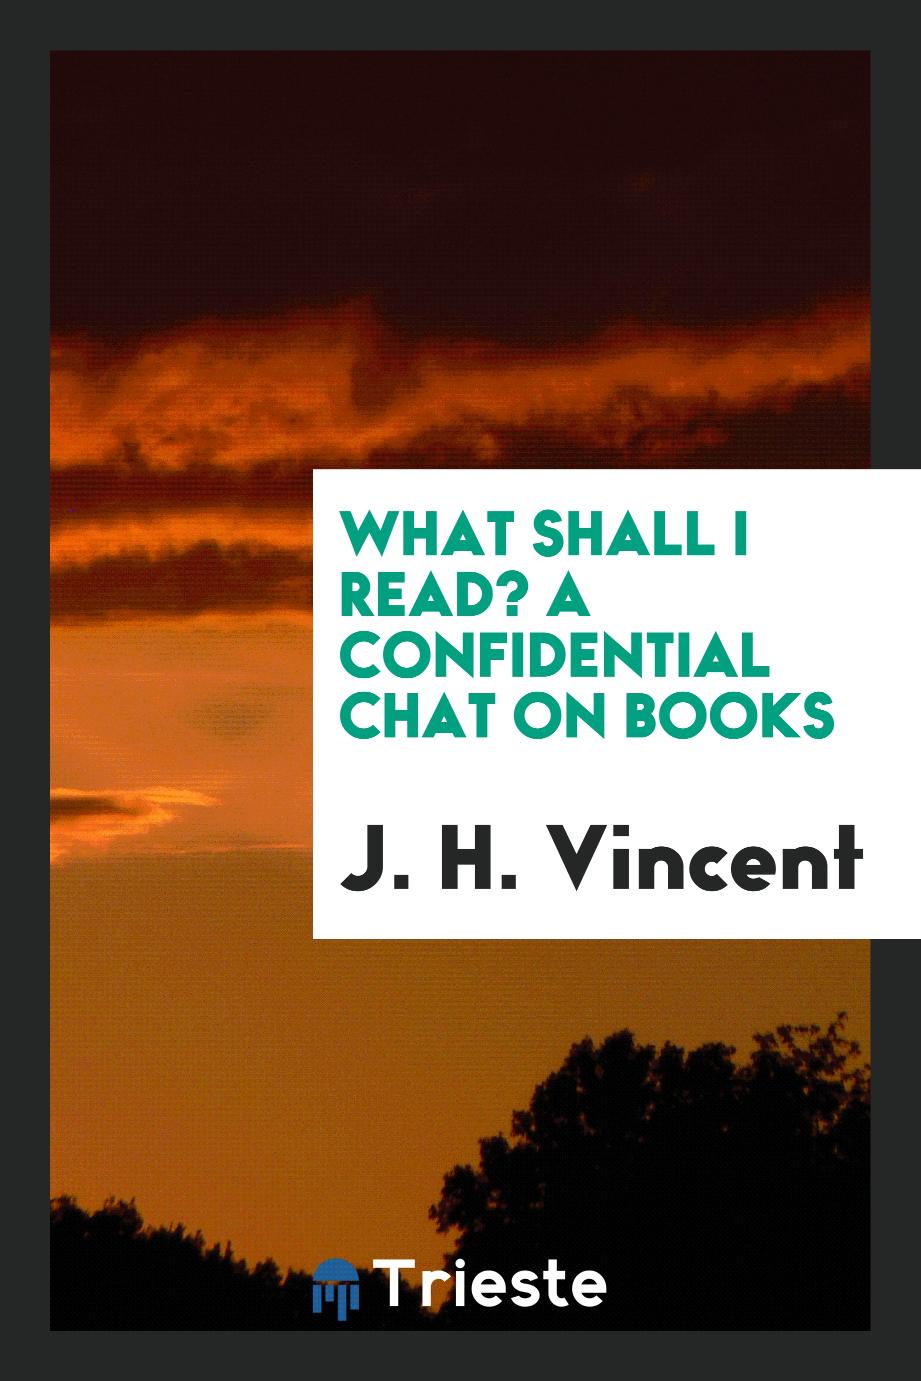 What shall I read? A confidential chat on books